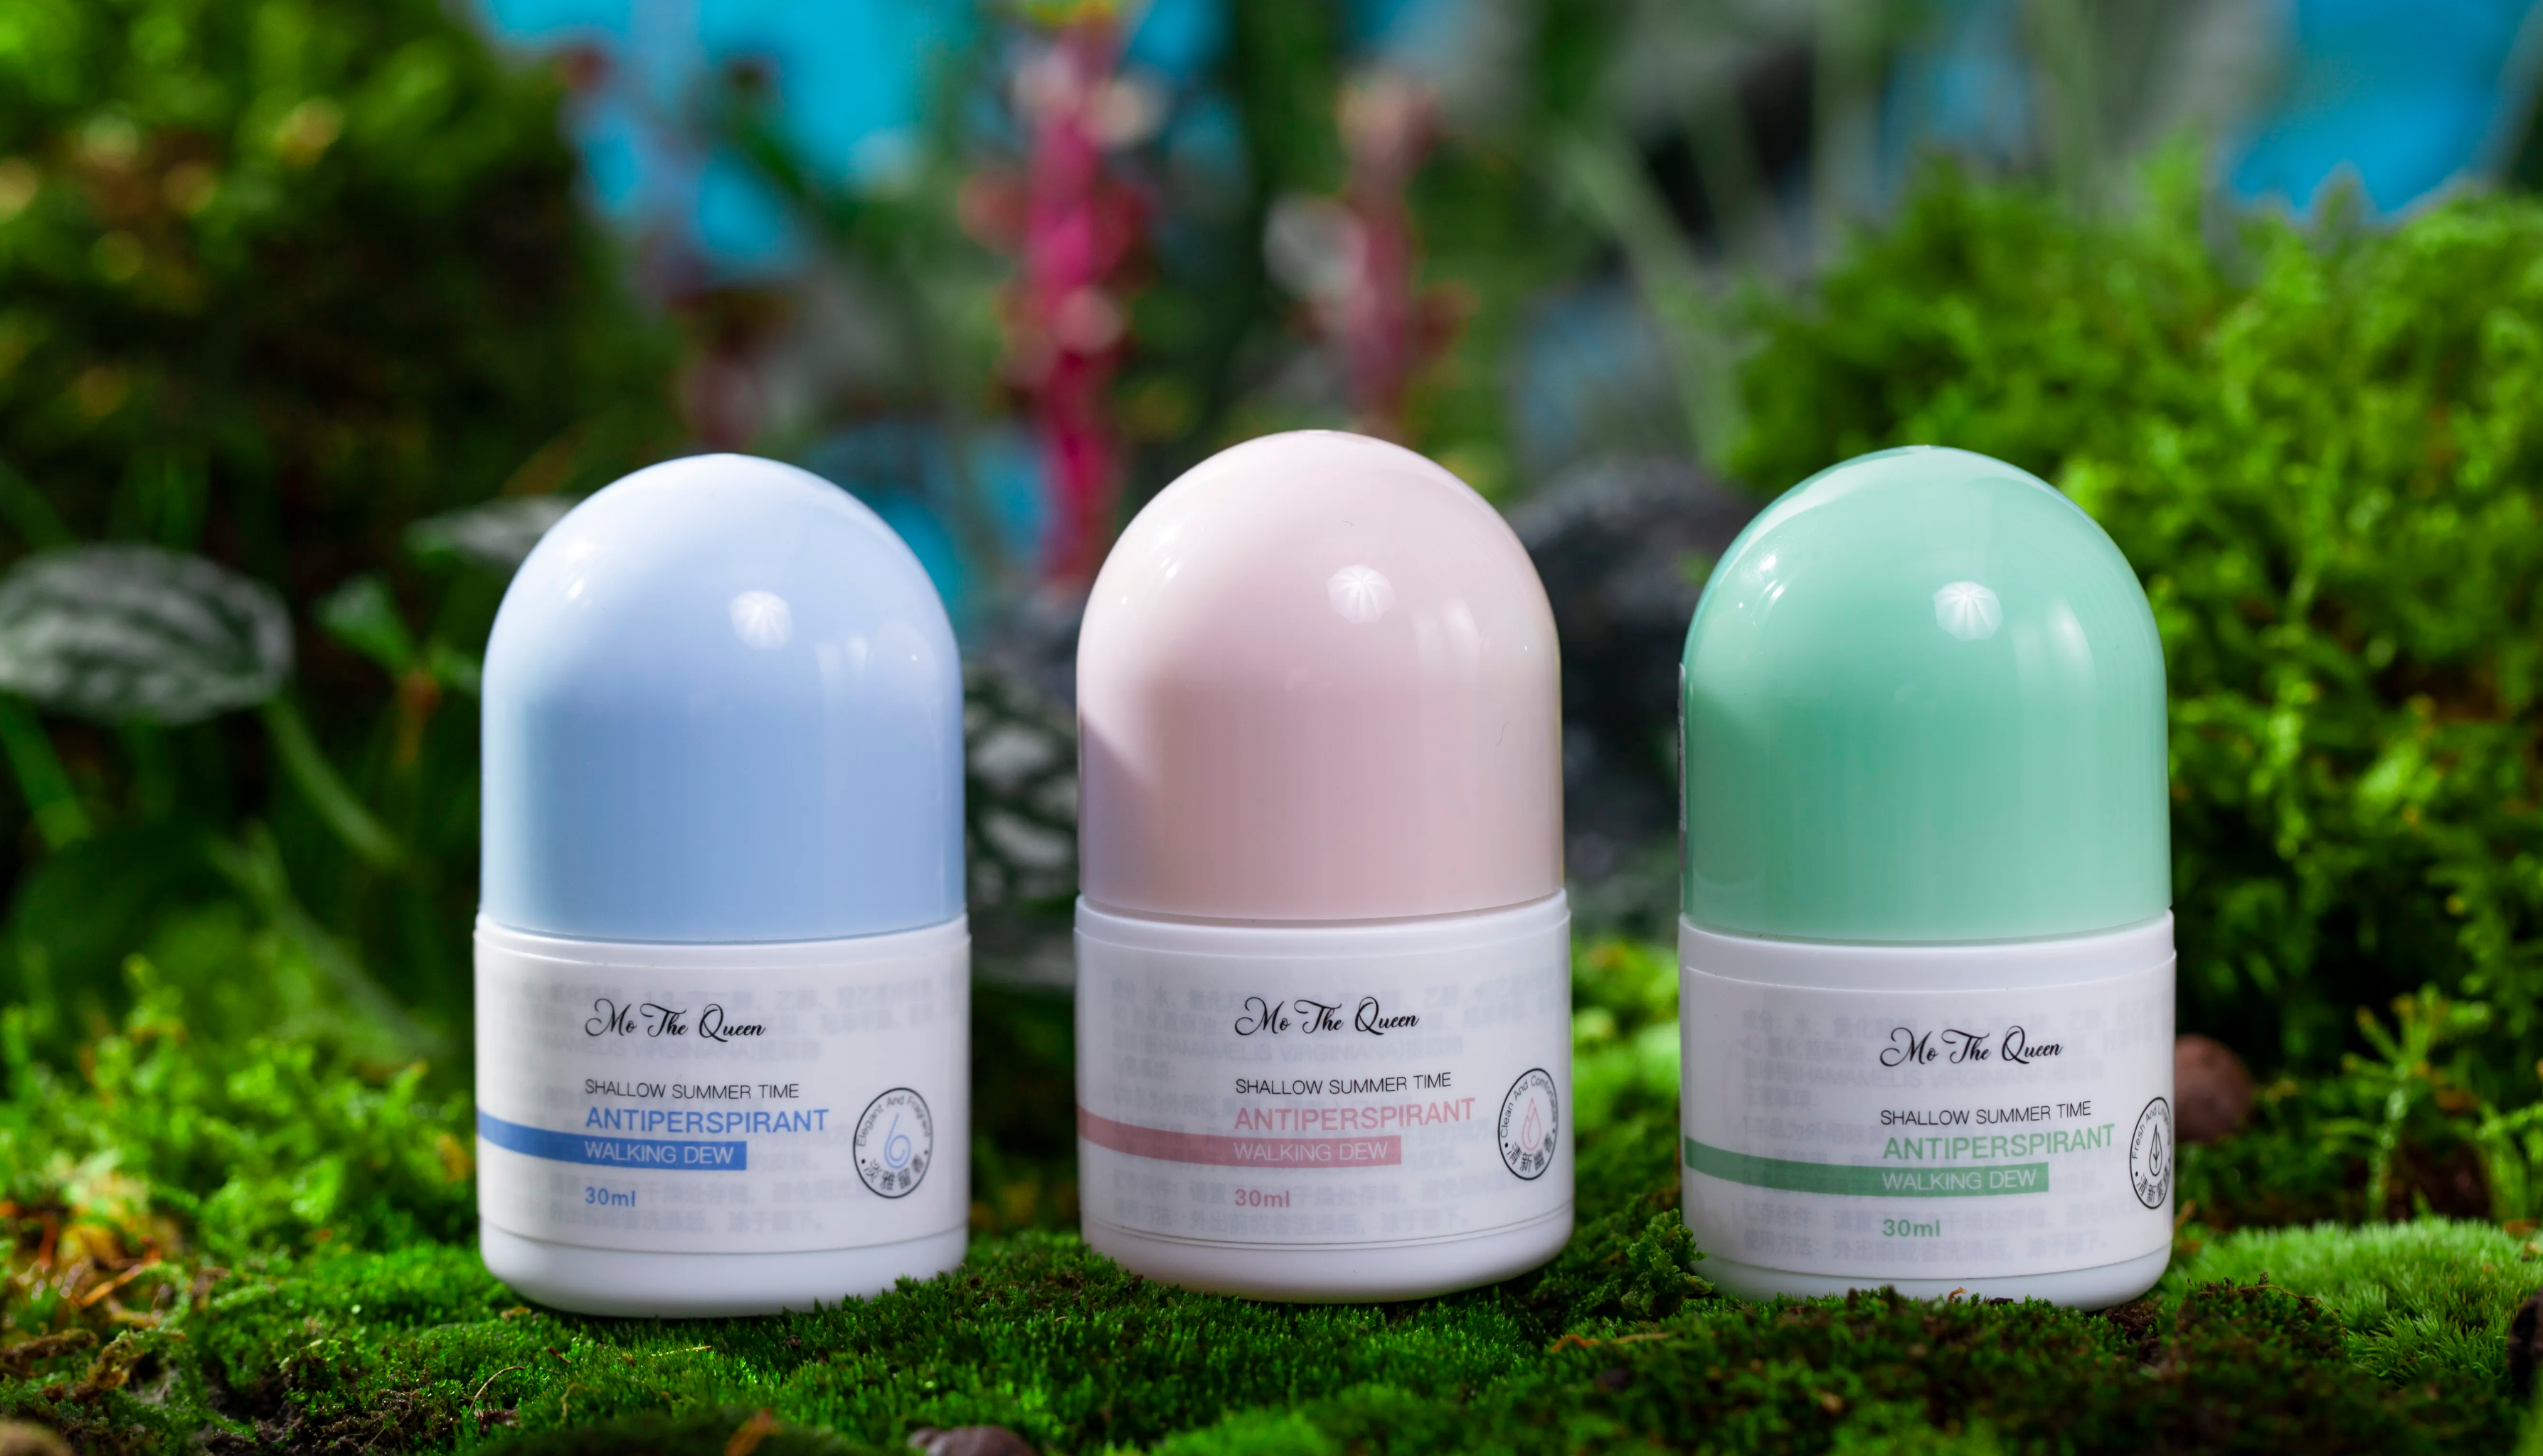 Did You Know That Deodorant Canisters Come in Such Sizes That You Can Choose From? 